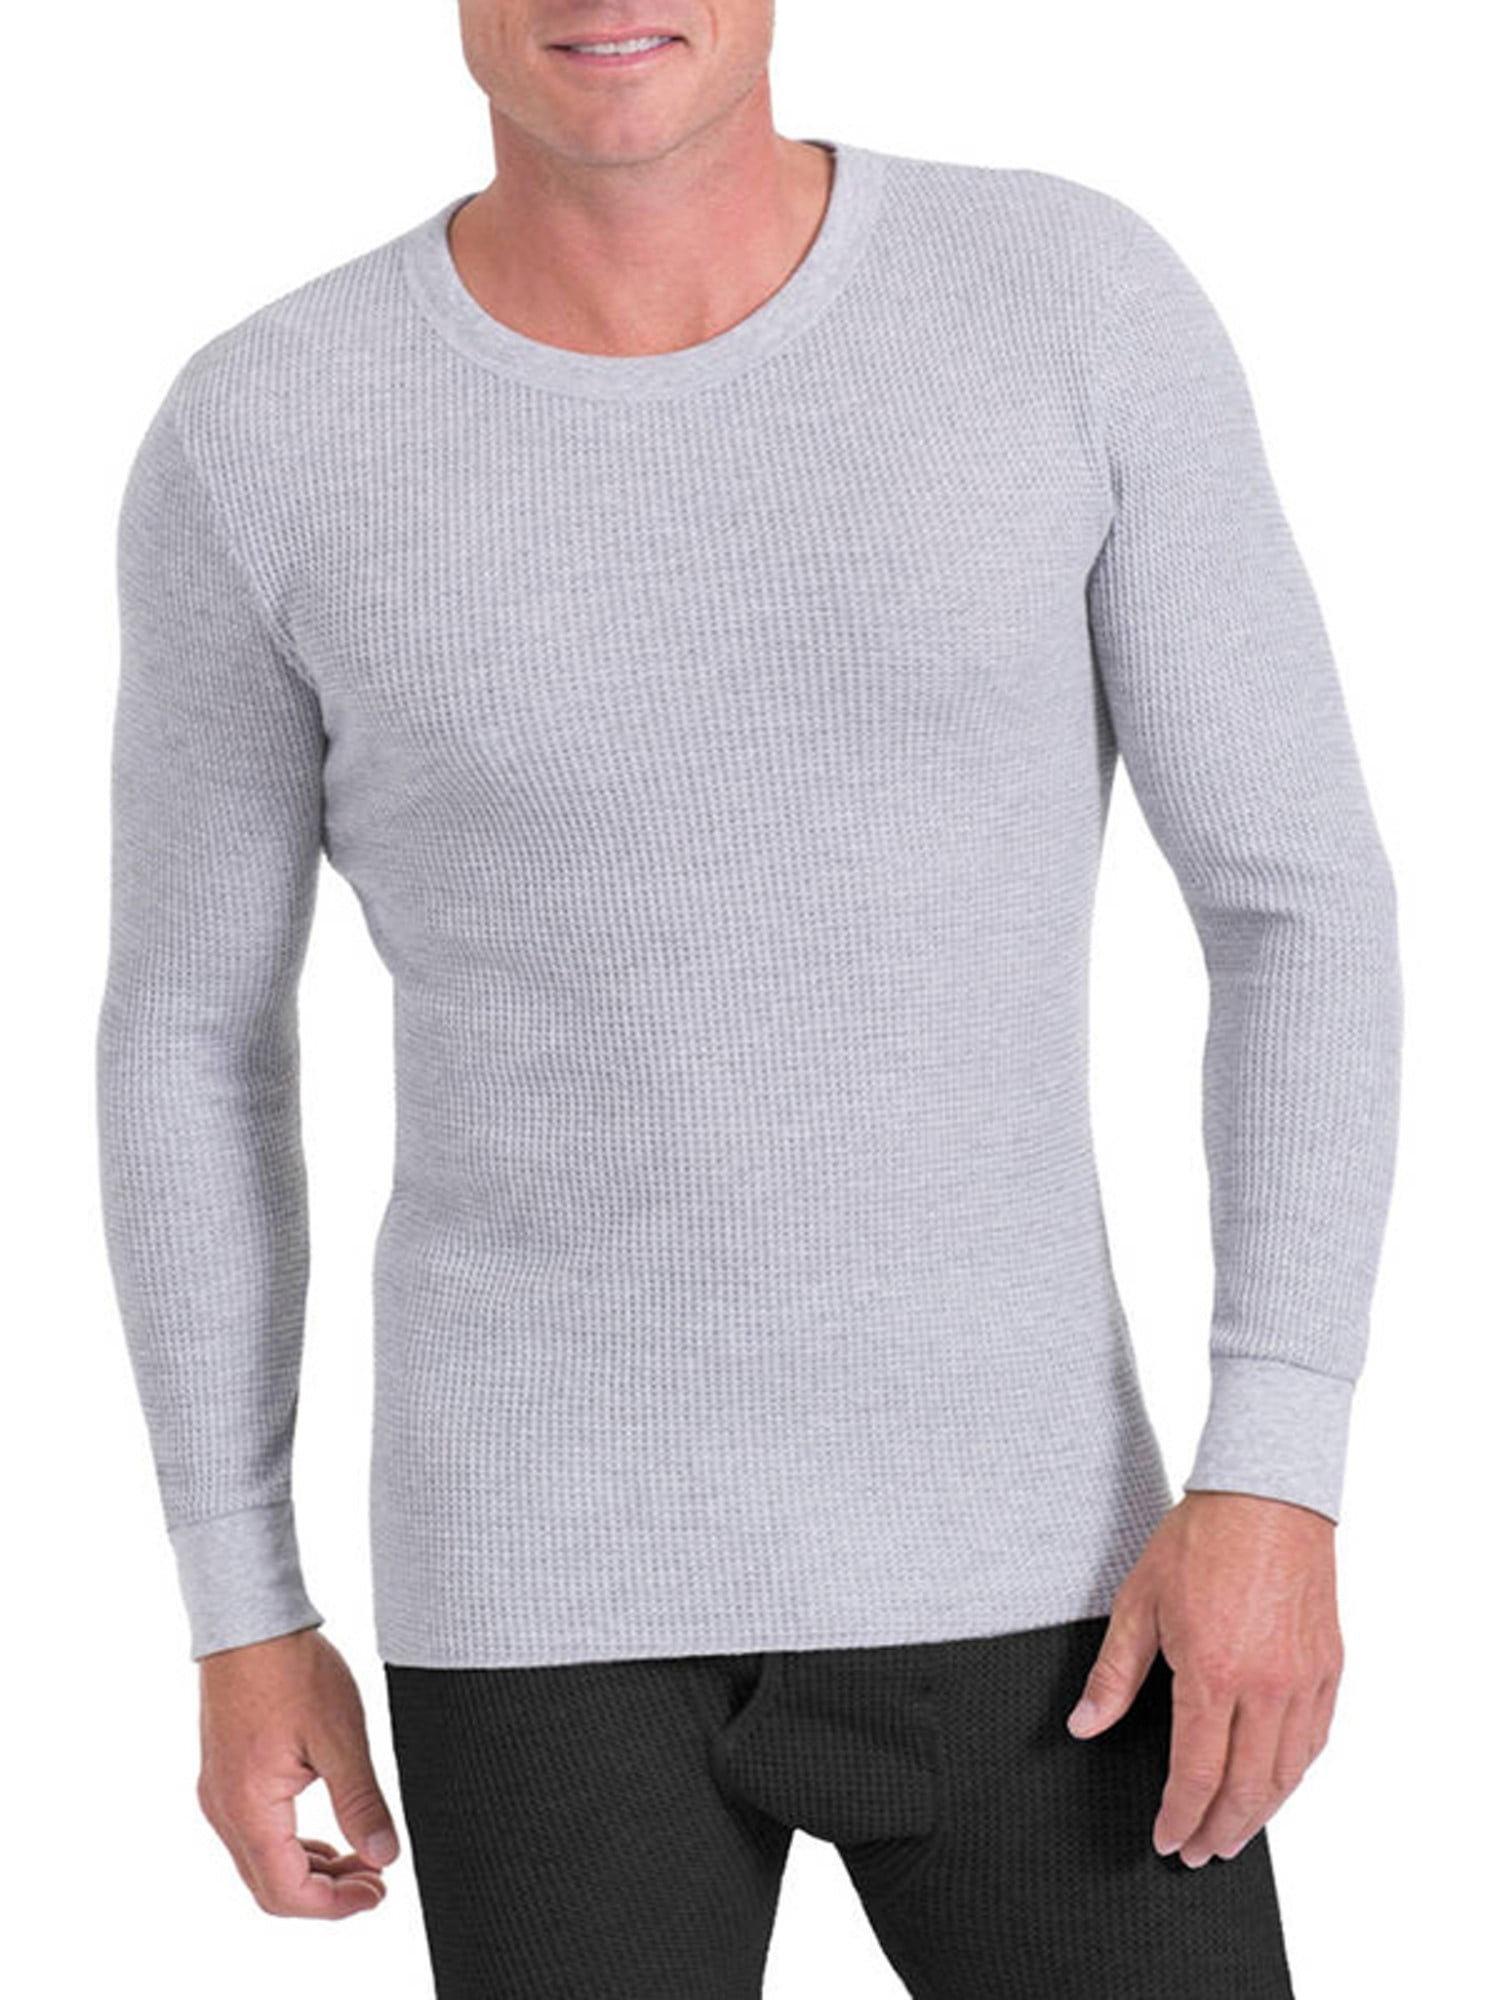 Fruit of the Loom Mens Waffle Weave Crew Neck Thermal Top